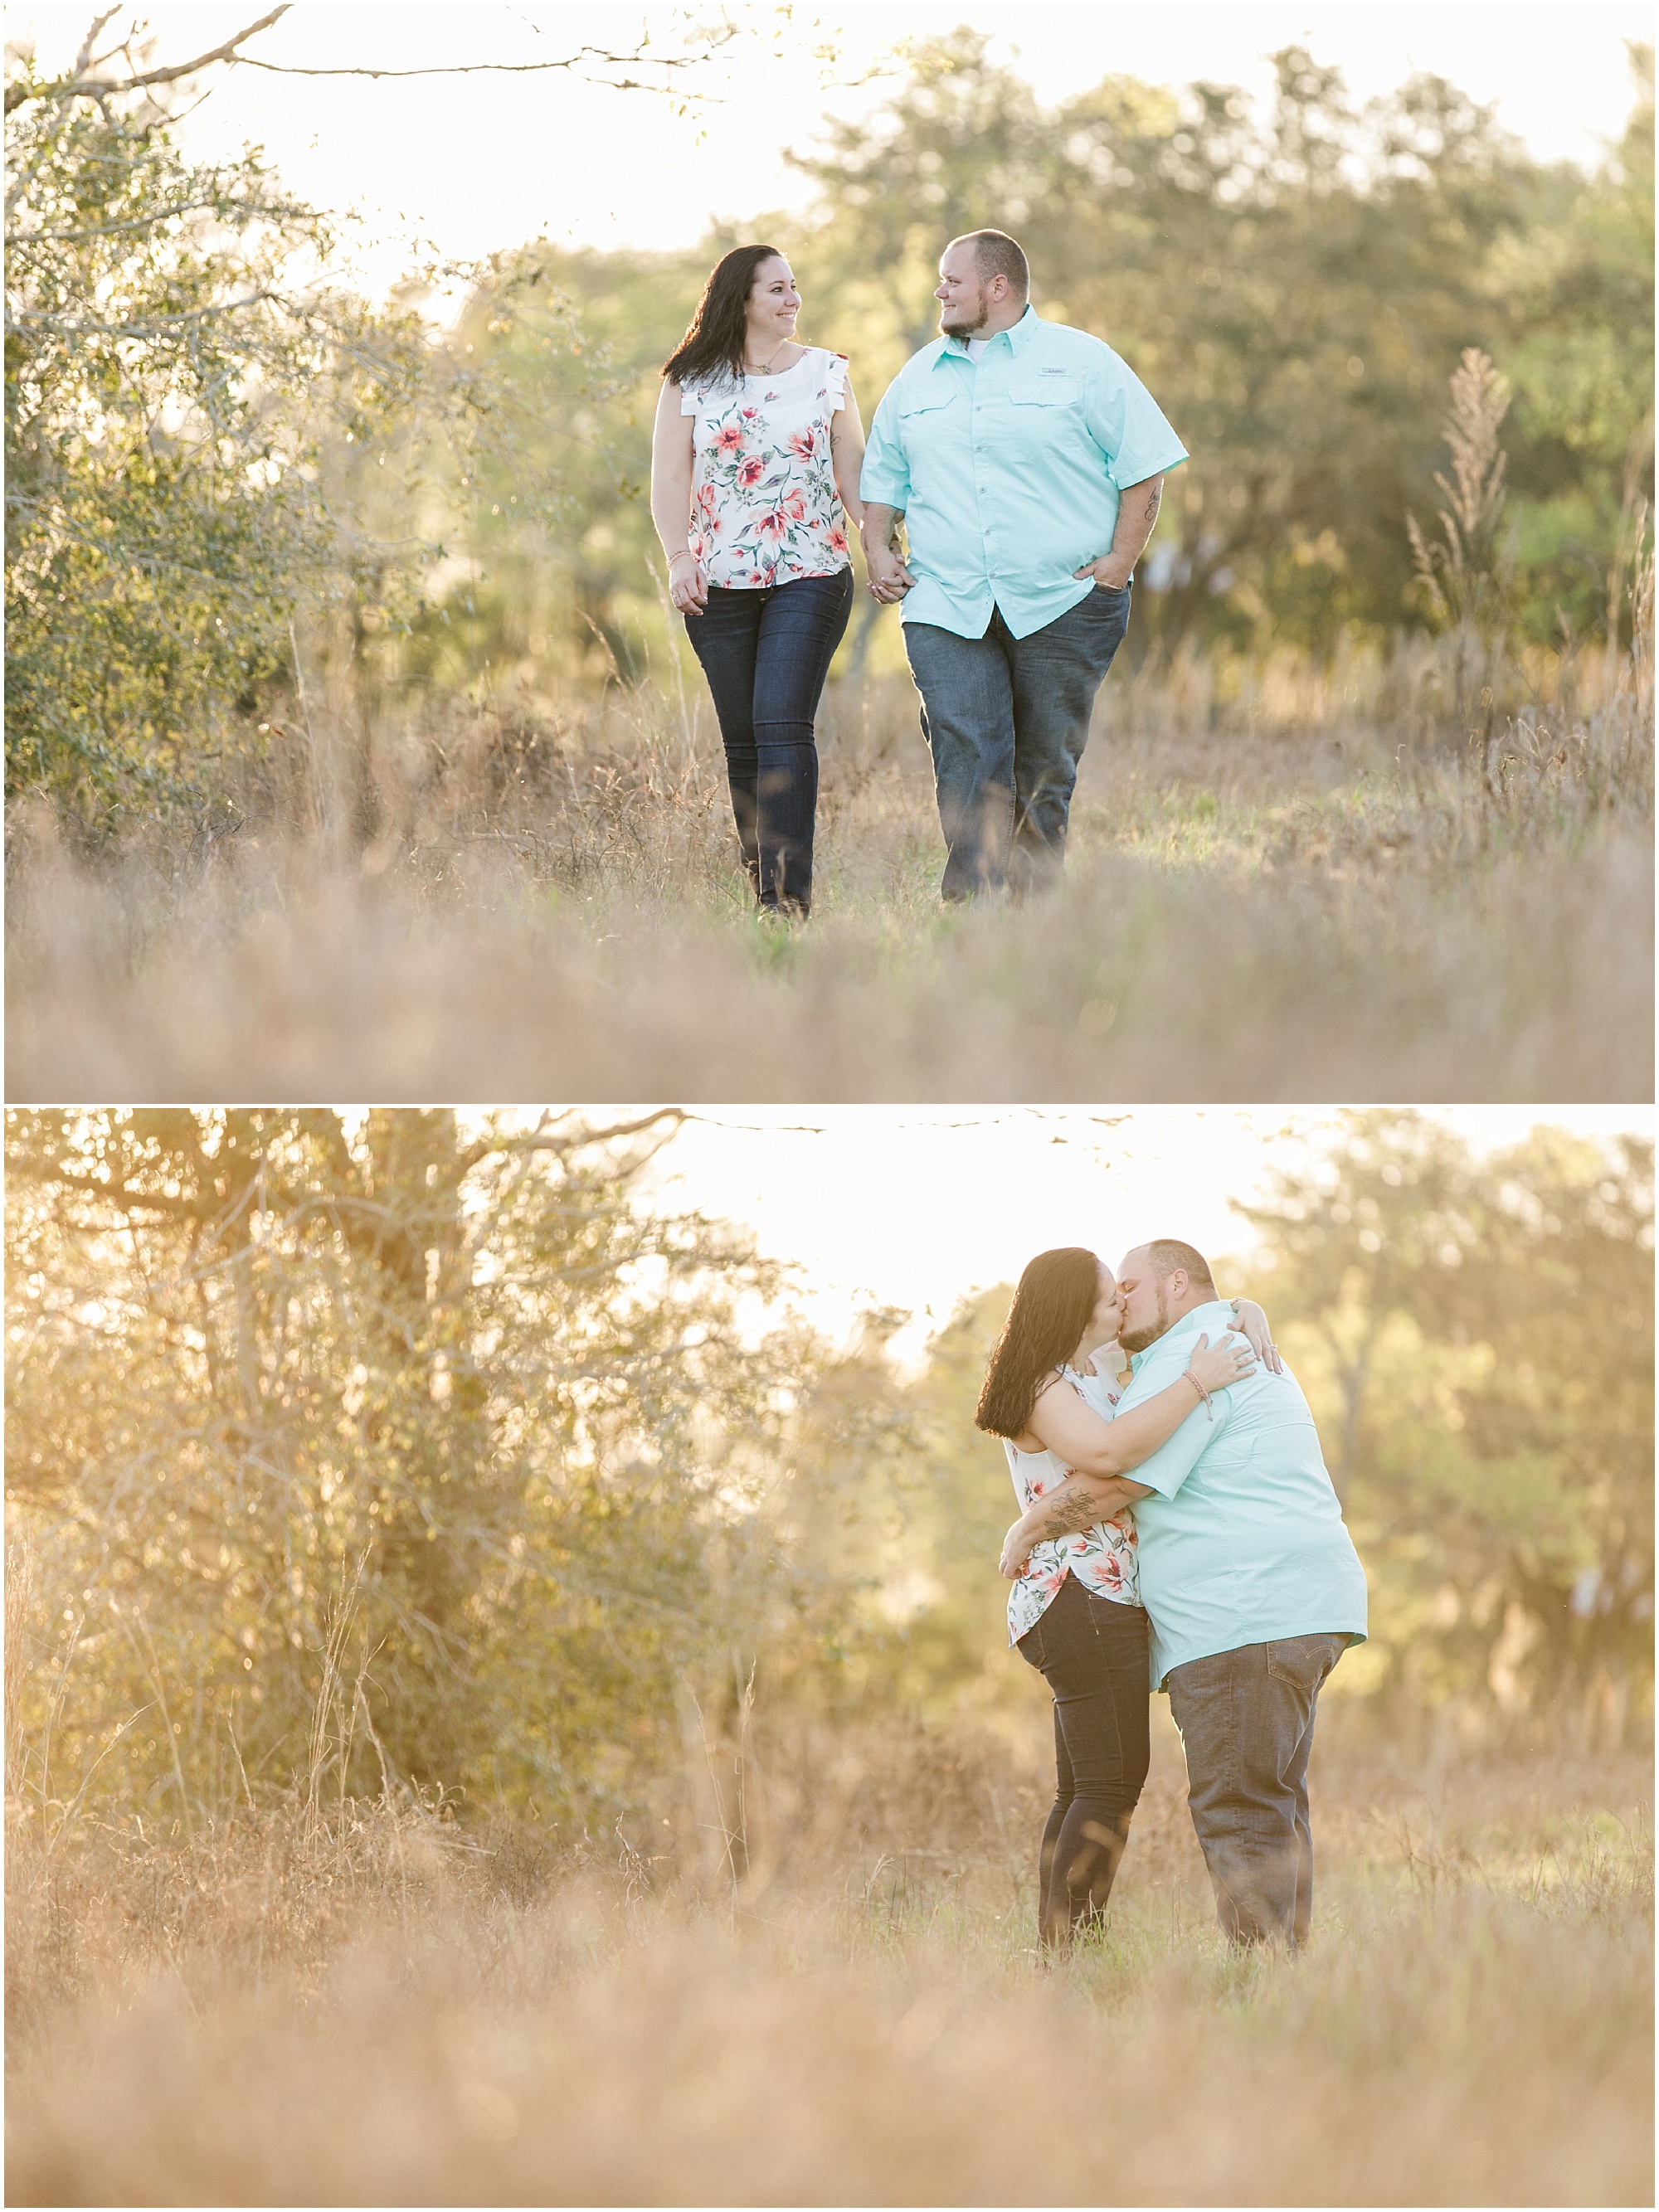 Engaged couple takes a walk in the field during sunset.